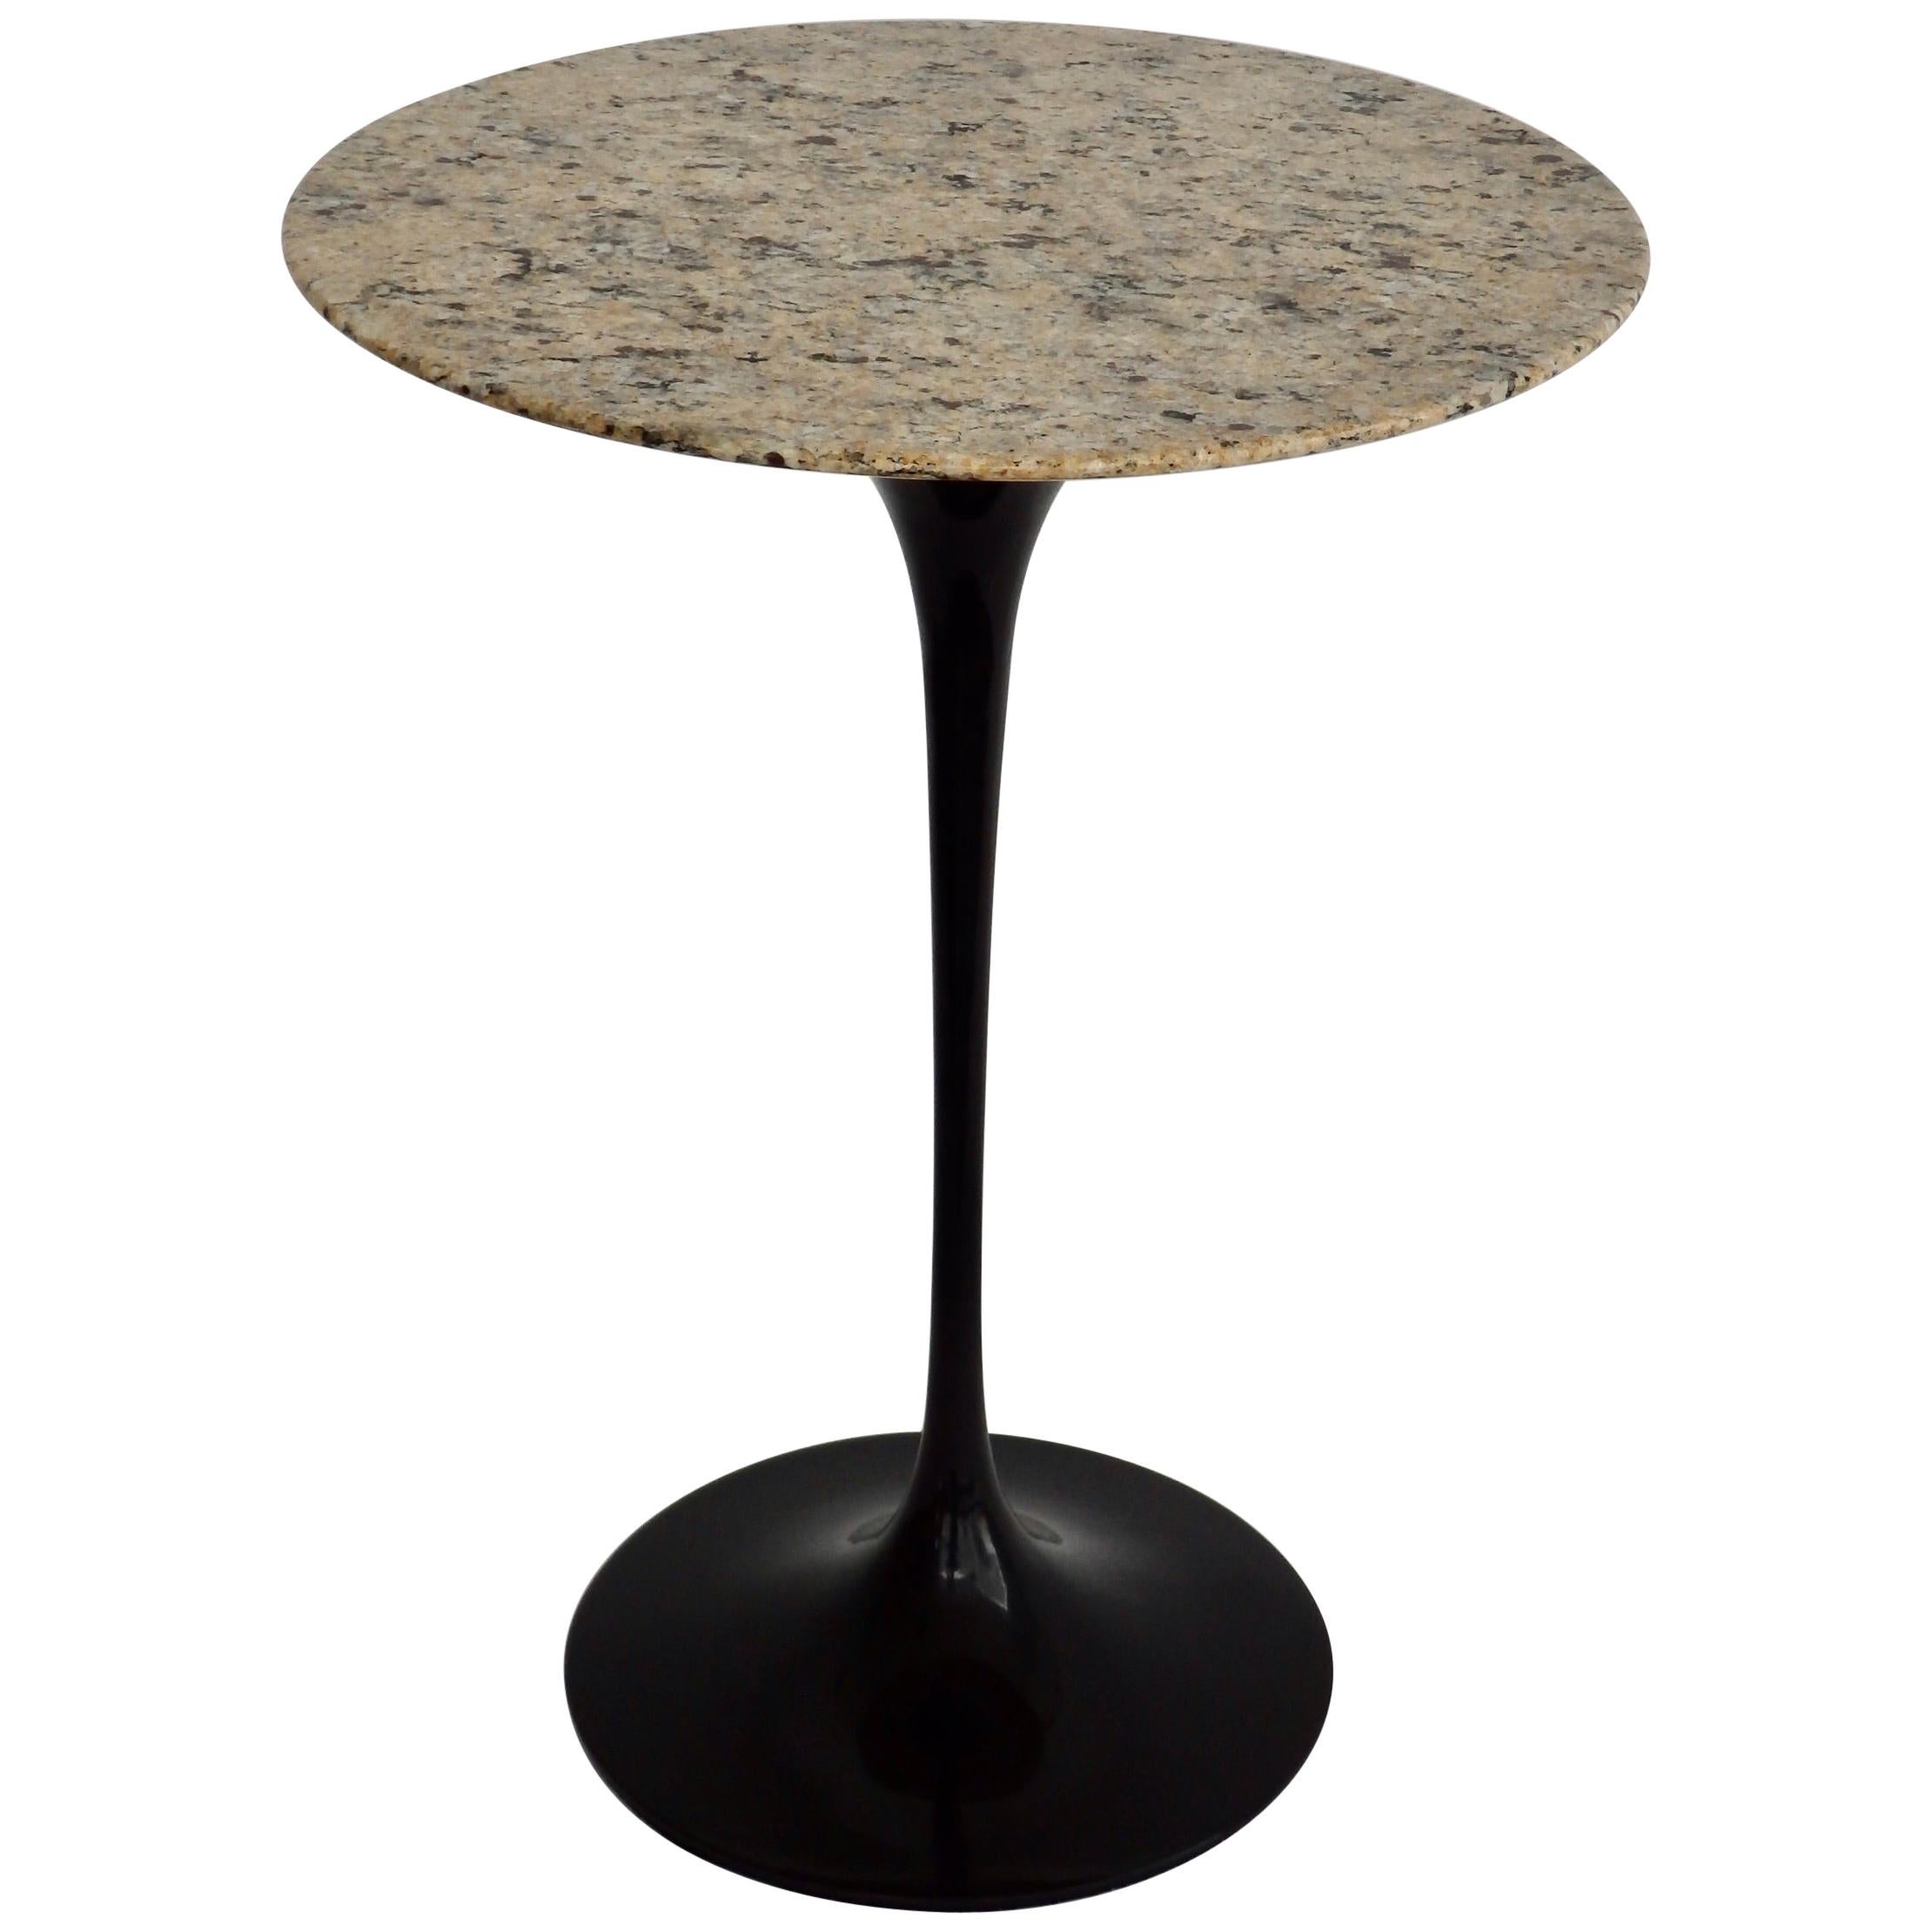 Eero Saarinen for Knoll Tulip Group Black Cast Iron Side Table with Stone Top